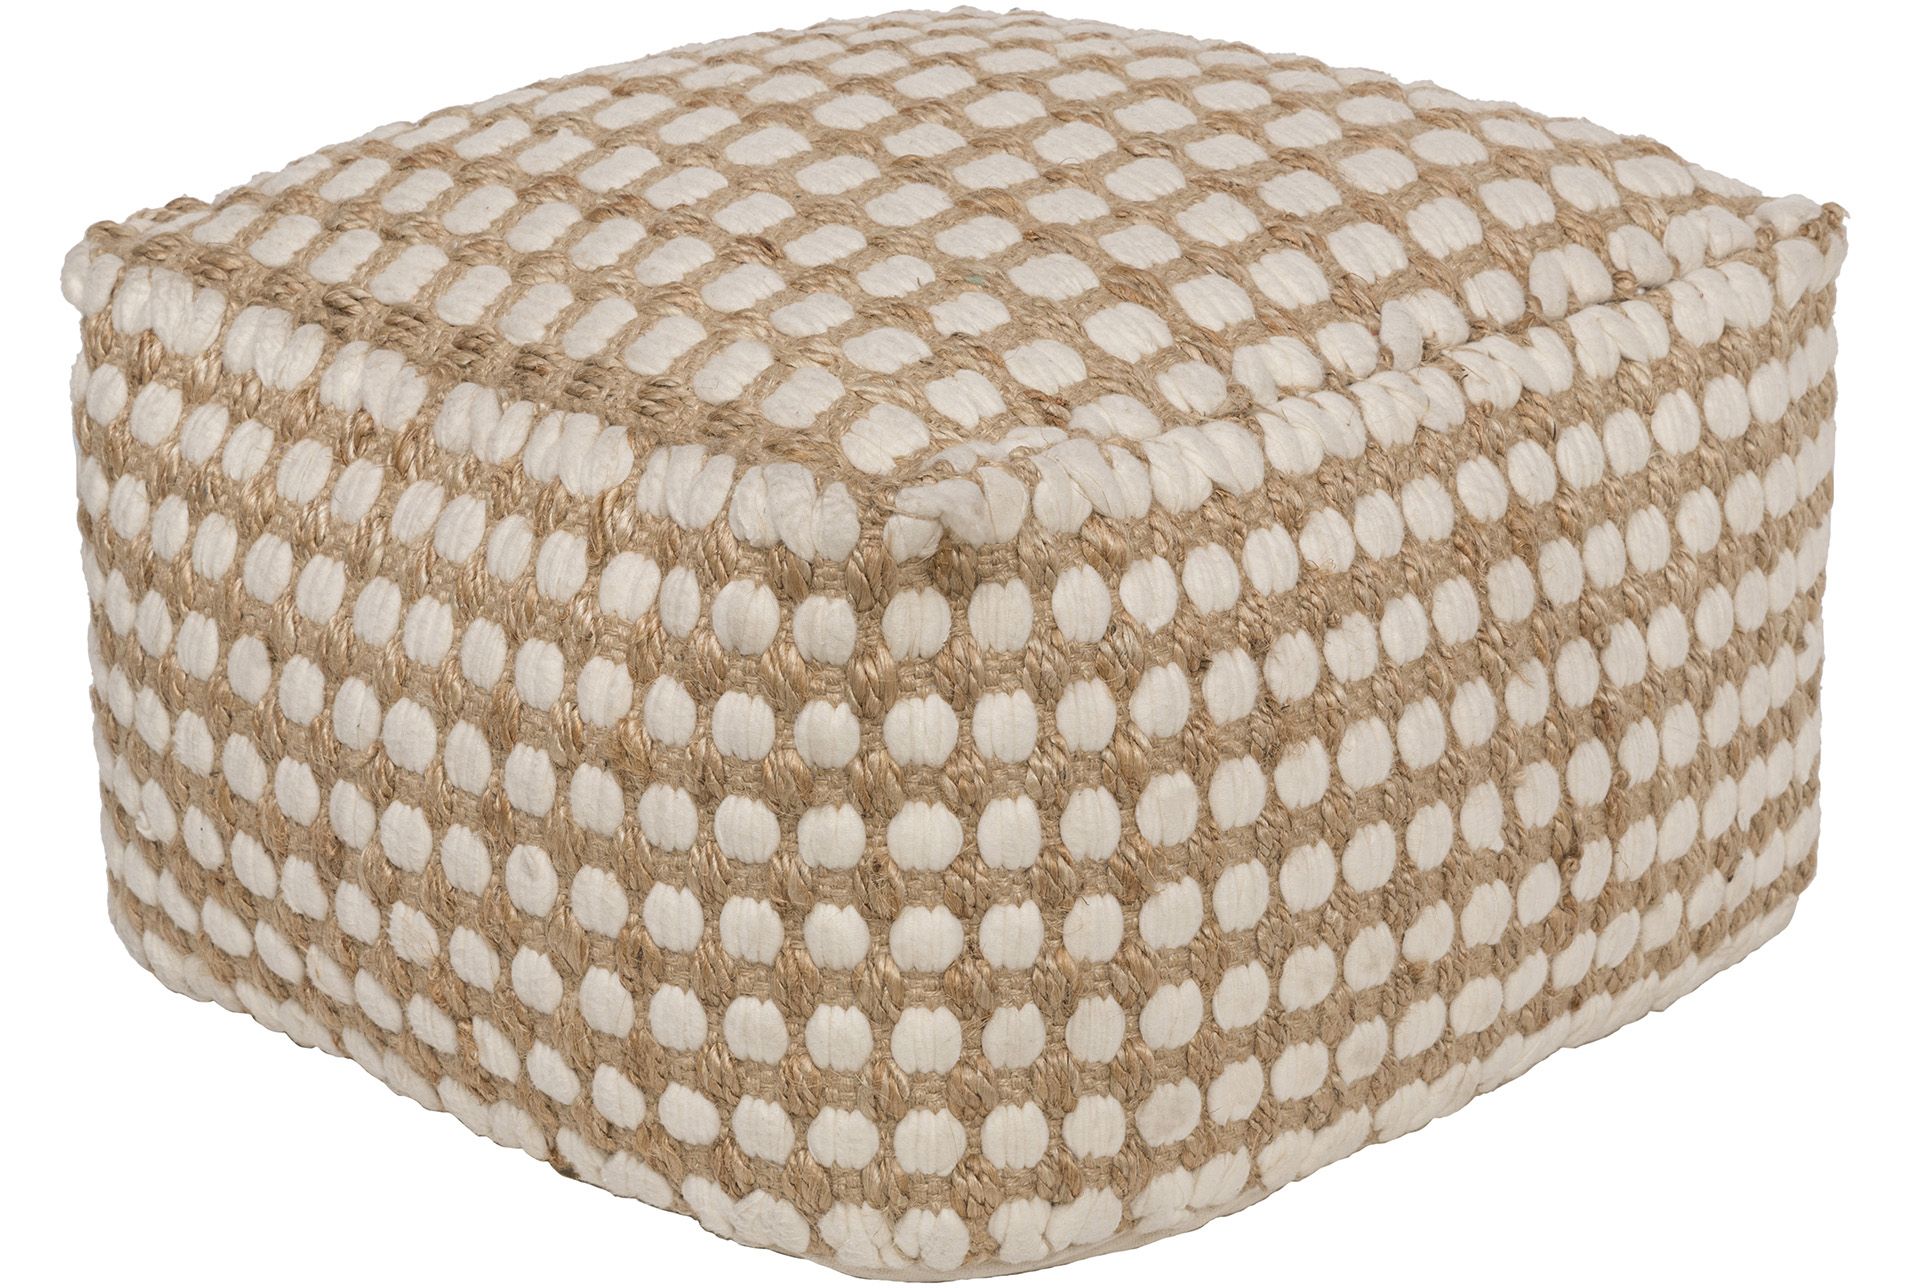 Pouf Ivory And Khaki Jute & Chenille Square – Natural – $150 In 2019 Within Oak Cove White And Khaki Woven Pouf Ottomans (View 16 of 20)